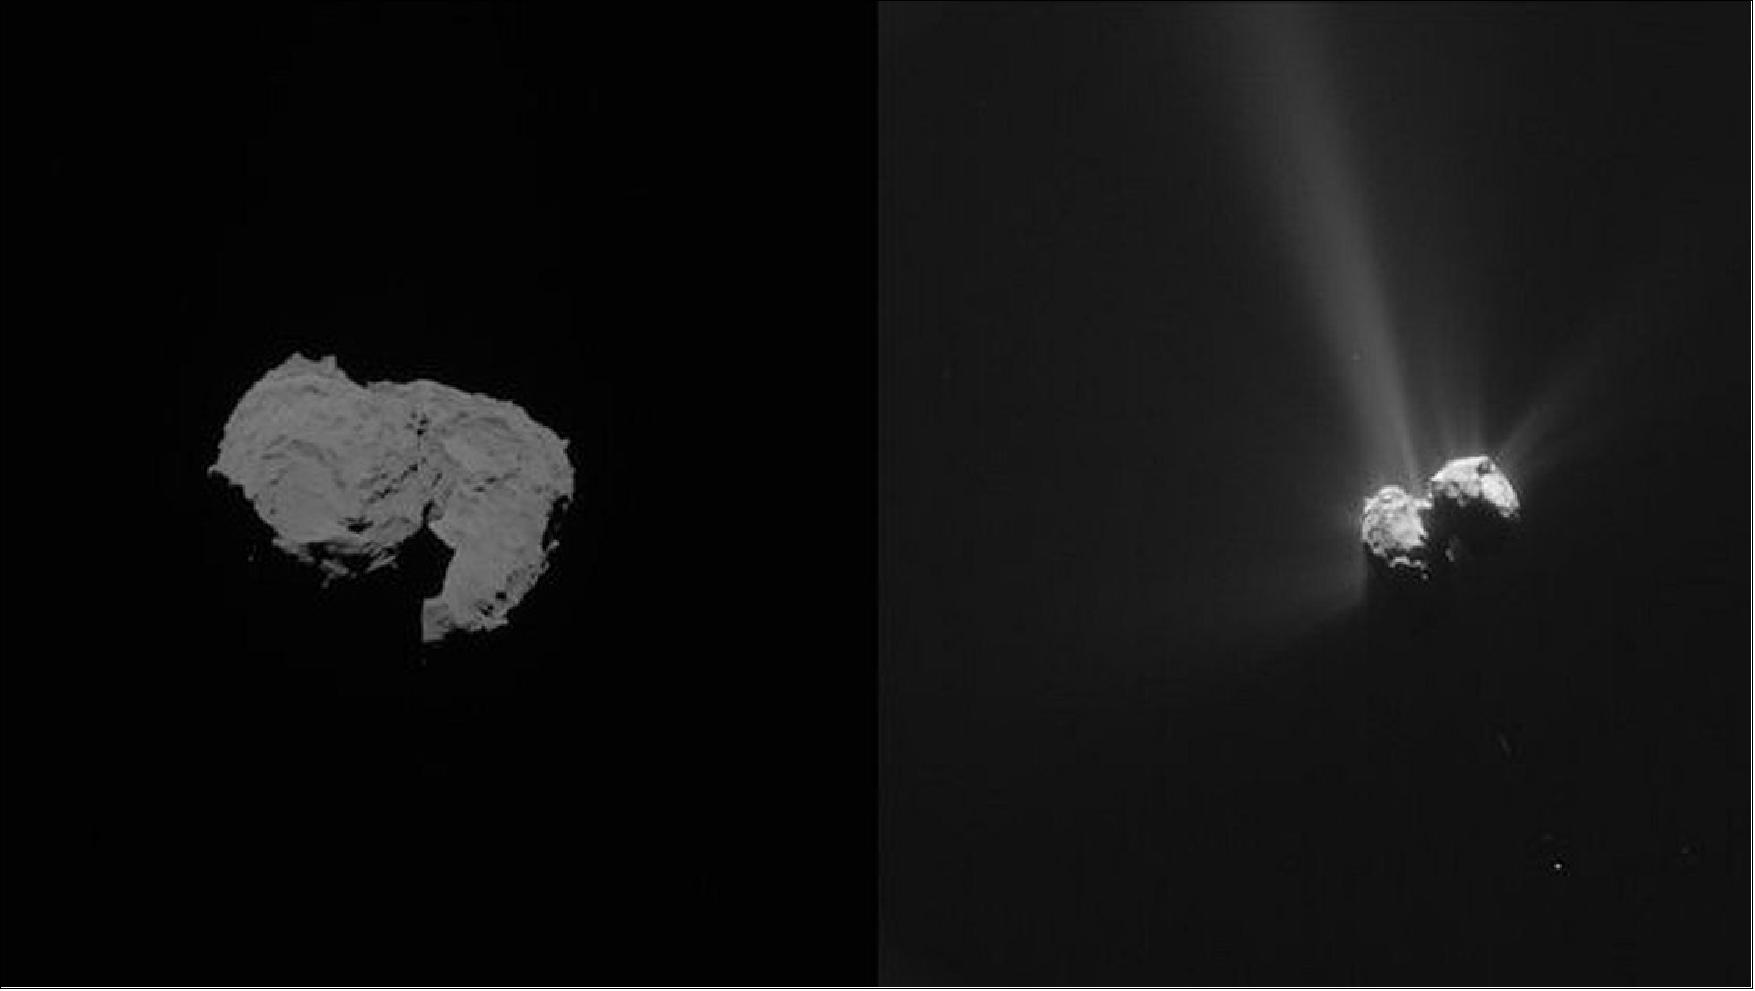 Figure 131: Images of Comet 67P/Churyumov–Gerasimenko on 6 August 2014 (left) and on 6 August 2015 (right) with increased exposure to the Sun’s energy and its resulting activity (image credit: ESA/Rosetta/NAVCAM – CC BY-SA IGO 3.0)